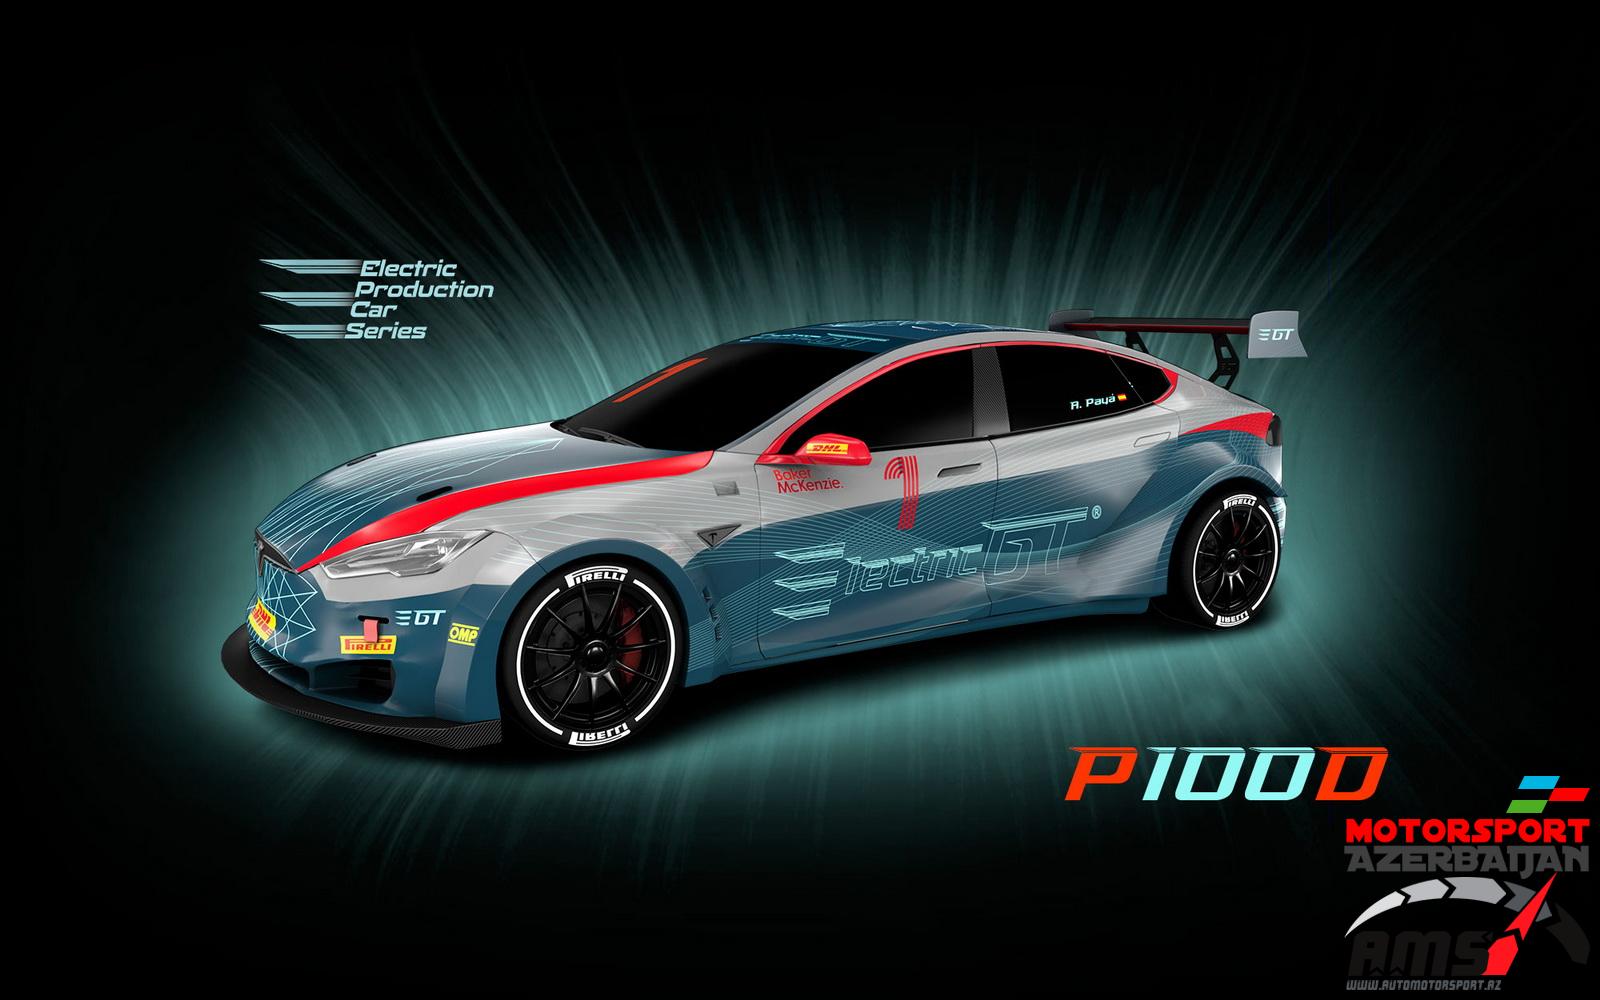 Electric Production Car Series